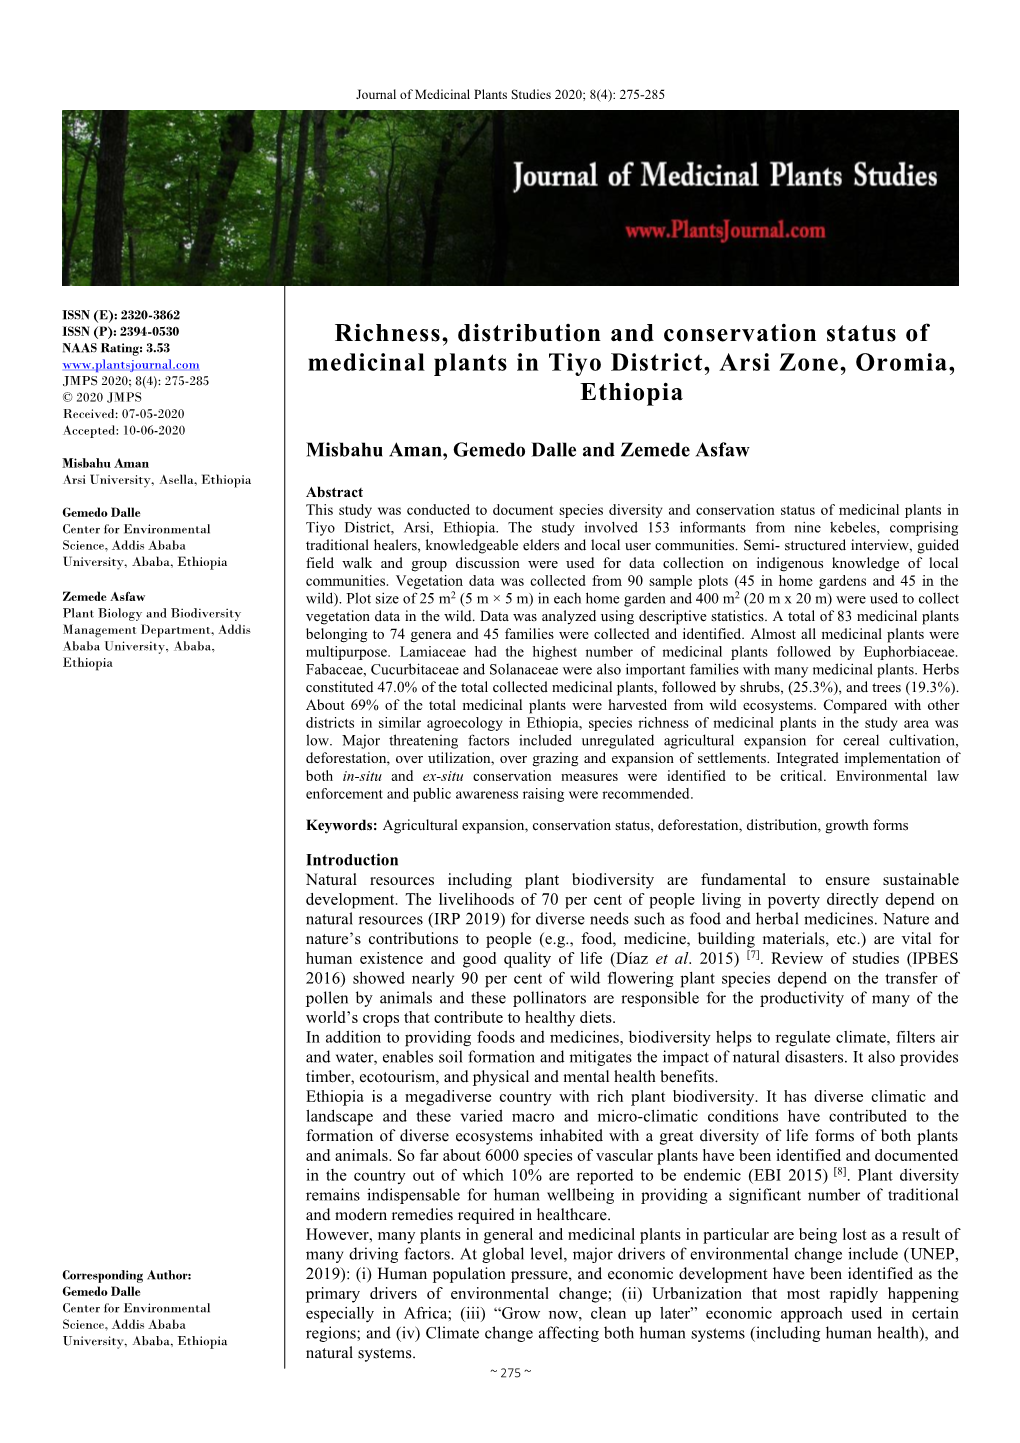 Richness, Distribution and Conservation Status of Medicinal